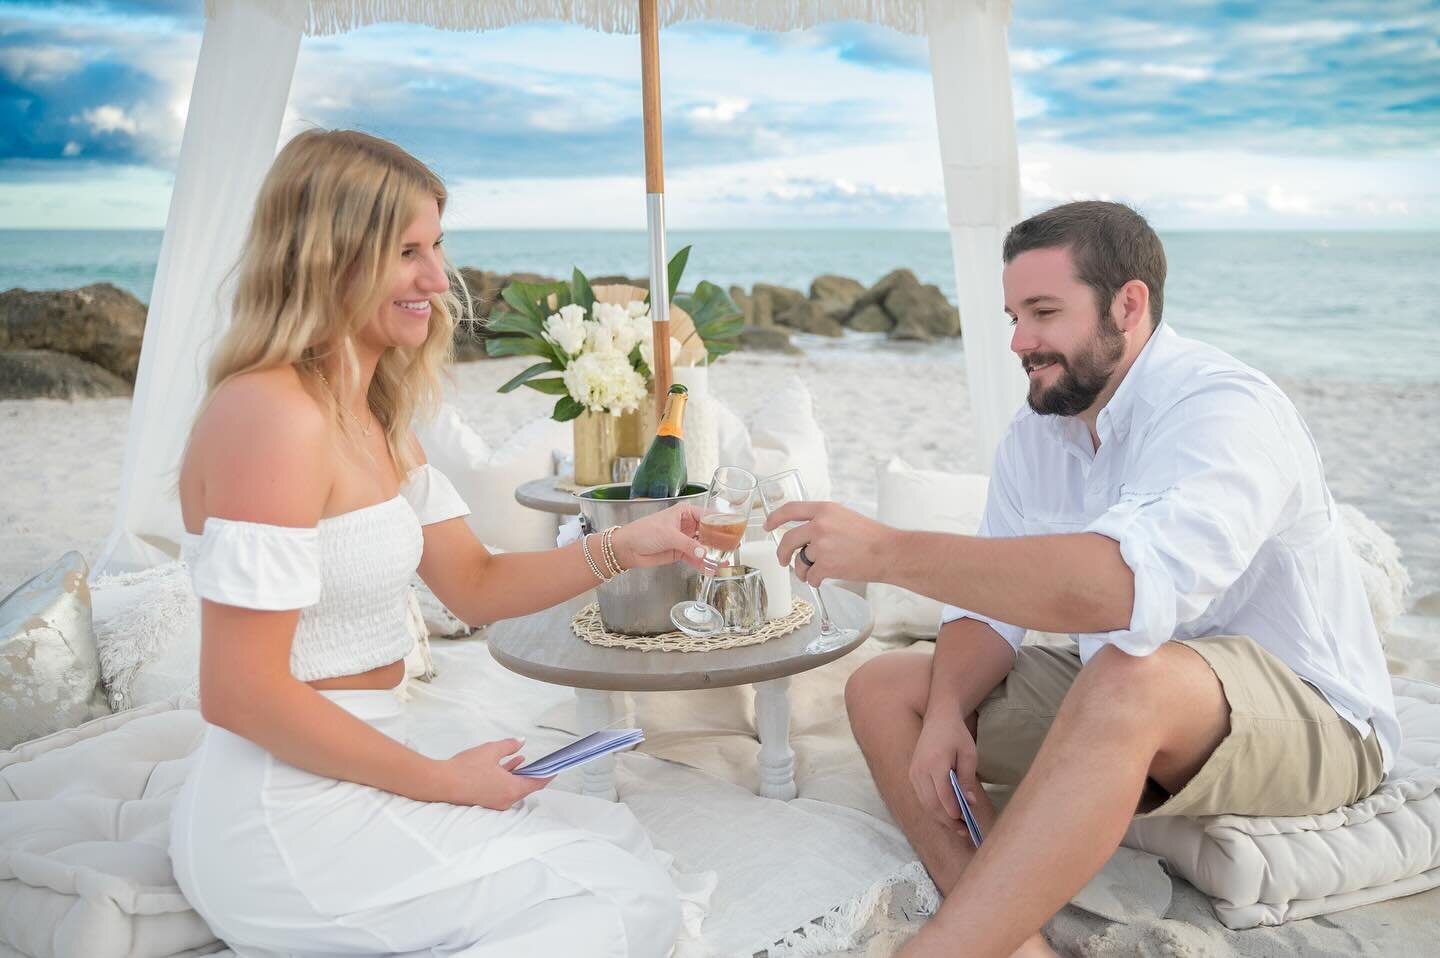 Our deepest thank you to Sid with @photovisualsm for sharing these beautiful photos of our recent Sunset Serenade beach proposal at @palmshotelmiami. What a lovely couple, what a splendid day for a vow renewal❤️ And working with such great profession